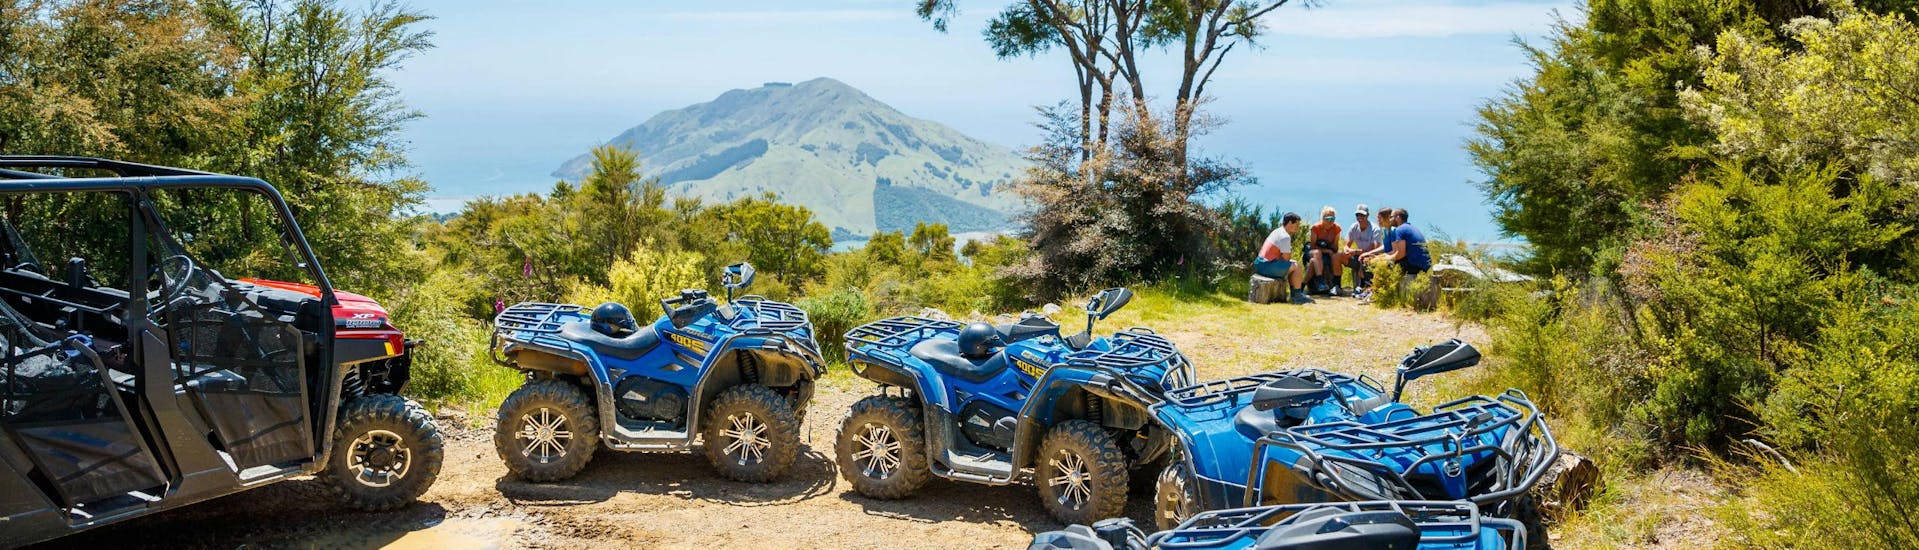 quad-biking-in-nelson-bayview-circuit-tour-cable-bay-adventure-park-nelson-hero